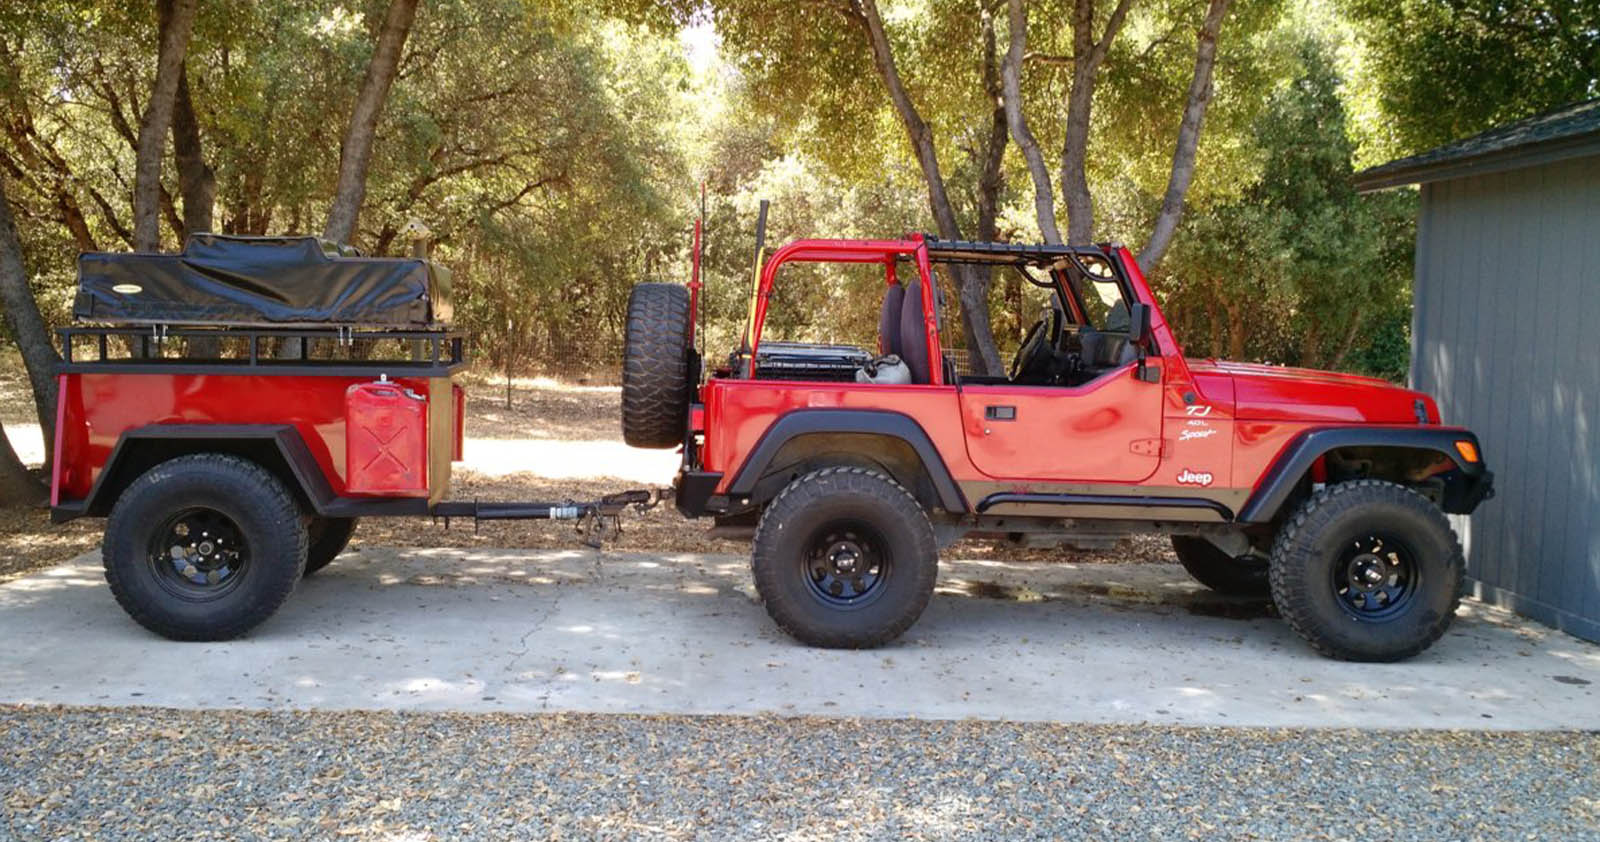 Red Jeep towing a trailer